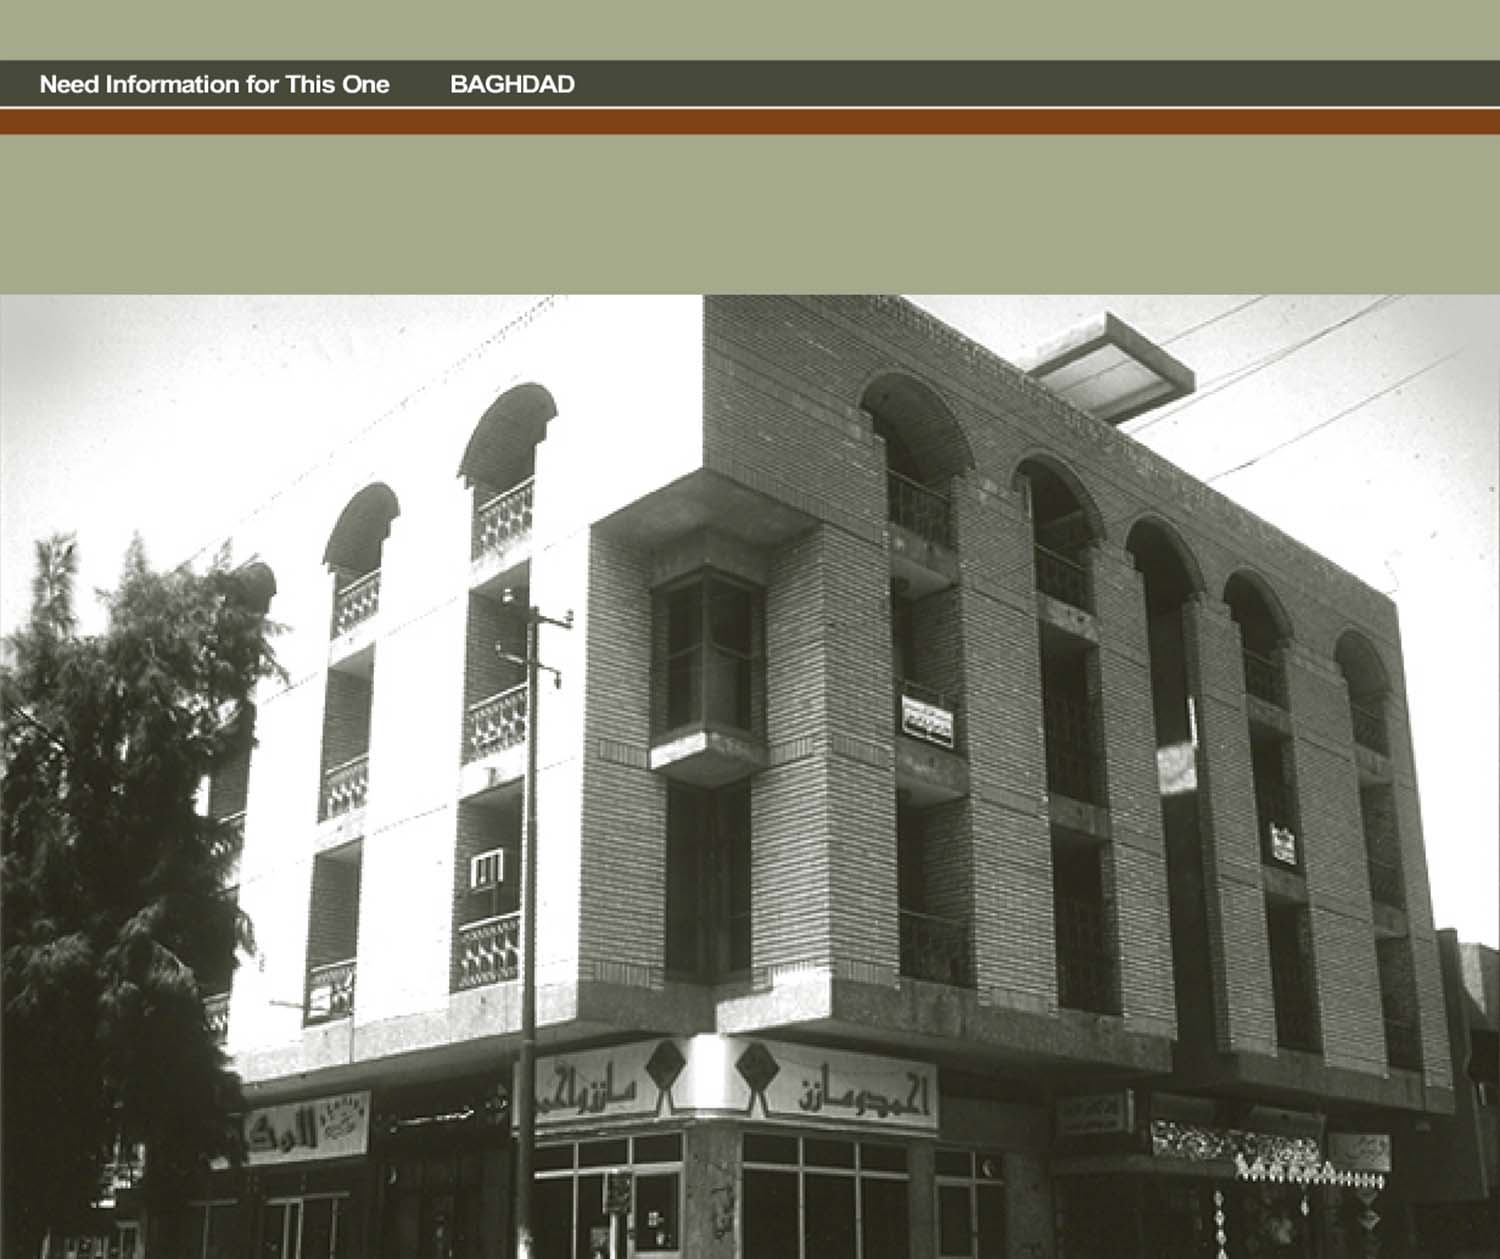 Exterior view of the Al Munir Commercial building from the digital image created for the online portfoli of Hashim Munir and Associates.